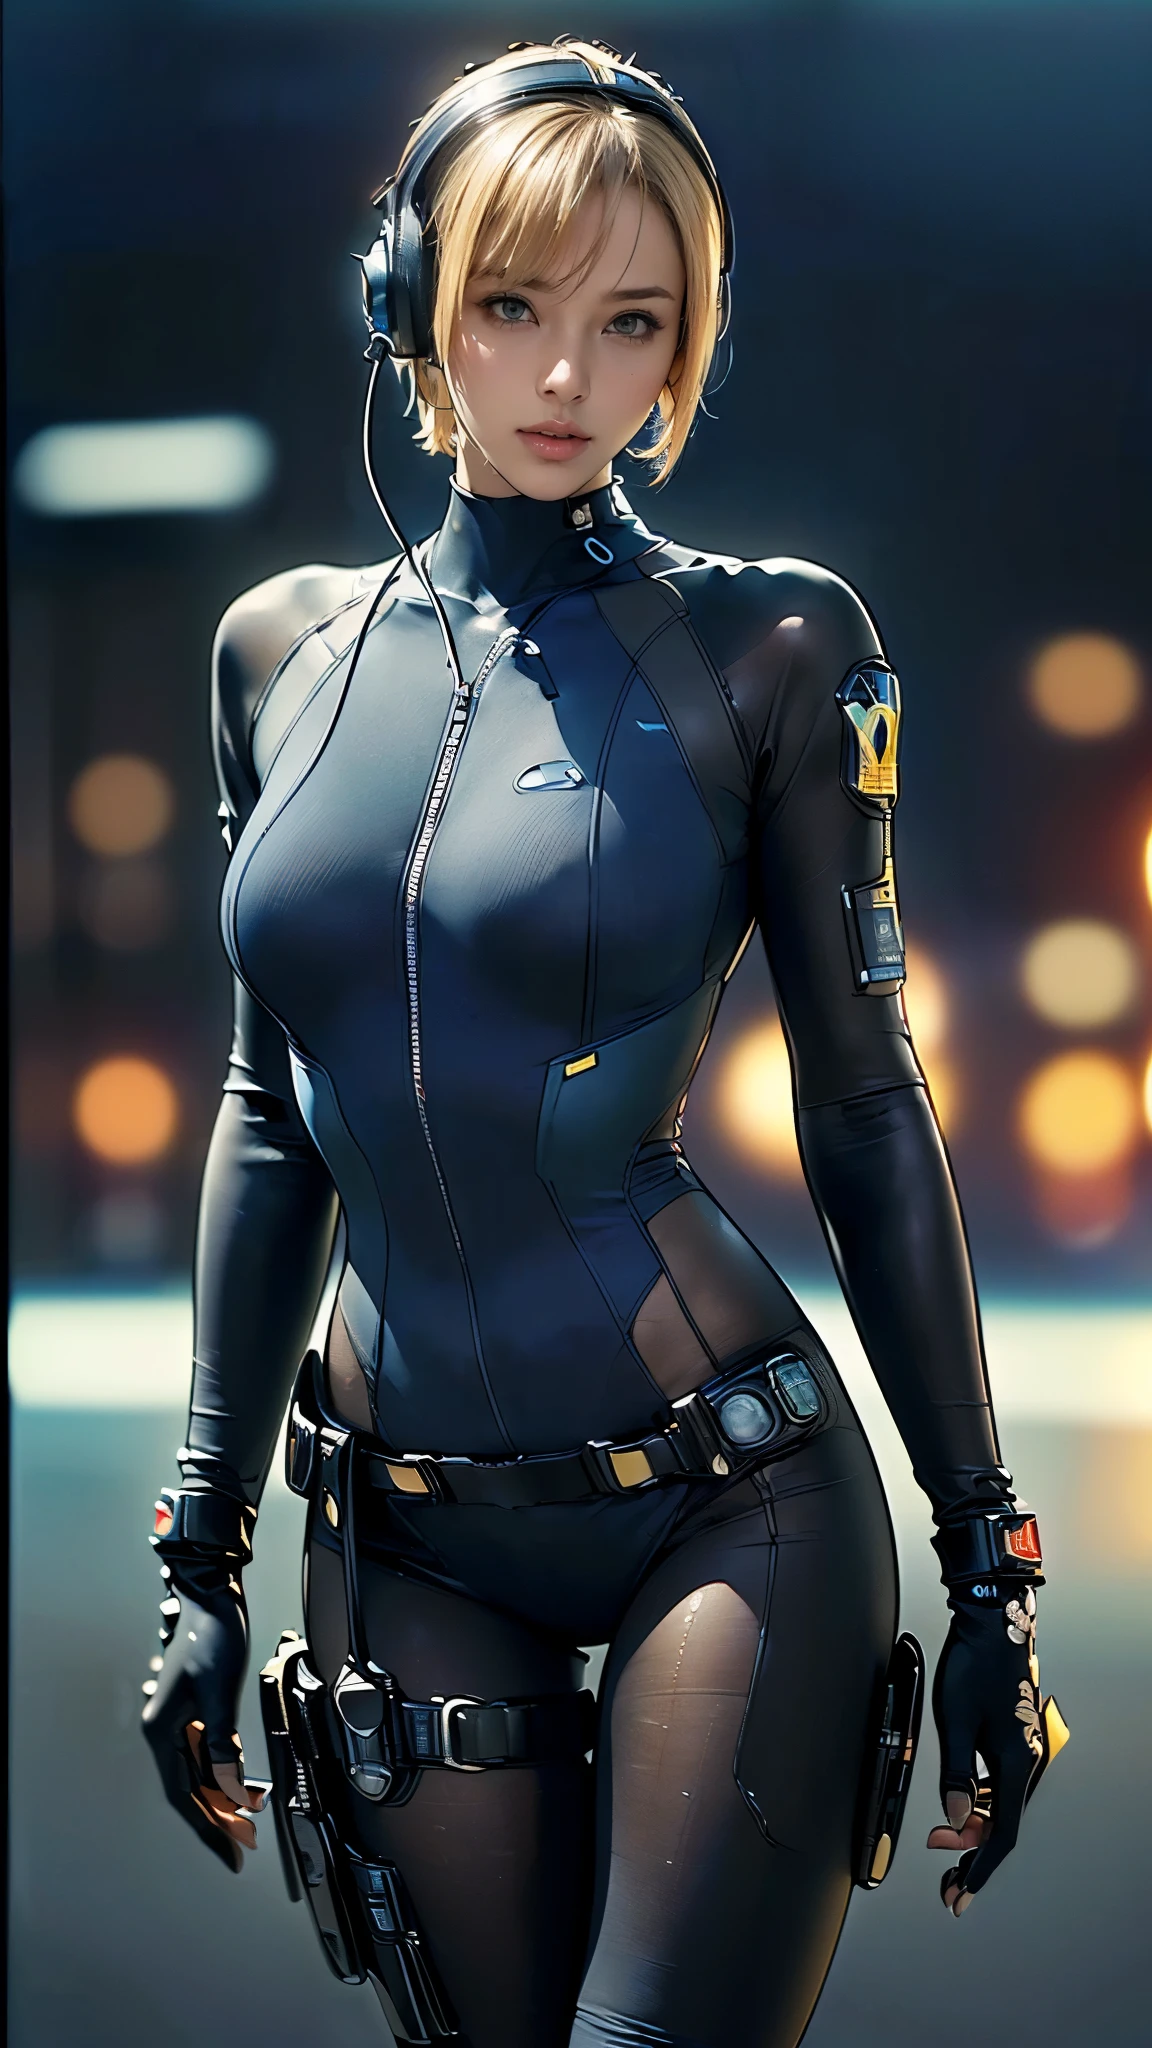 (One Woman),(((A female member of the future police force is standing))),((Navy blue tactical bodysuit:1.5)),((headset:1.5)),((Tactical Holster:1.5)),(Gloves:1.5),(serious:1.5),(extra short hair:1.5),(bionde:1.5),(Beautiful Eyes:1.3),(Very detailedな顔:1.5),((Very detailed drawing of a female hand:1.5)),((muscular:1.5)),(Sexy Looks:1.5),((Thick thighs:1.5)),(Beautiful body:1.5),((Very sensual:1.5)),(The background is a futuristic city:1.5),(Cyberpunk atmosphere:1.5),(((Blur the background:1.5))),(Written boundary depth:1.5),BREAK(((masterpiece:1.5),(highest quality:1.5),(Very detailed:1.5),(High resolution:1.5),(Realistic:1.5),(Realistic:1.5),(Delicate depiction),(Careful depiction))),8K,wallpaper